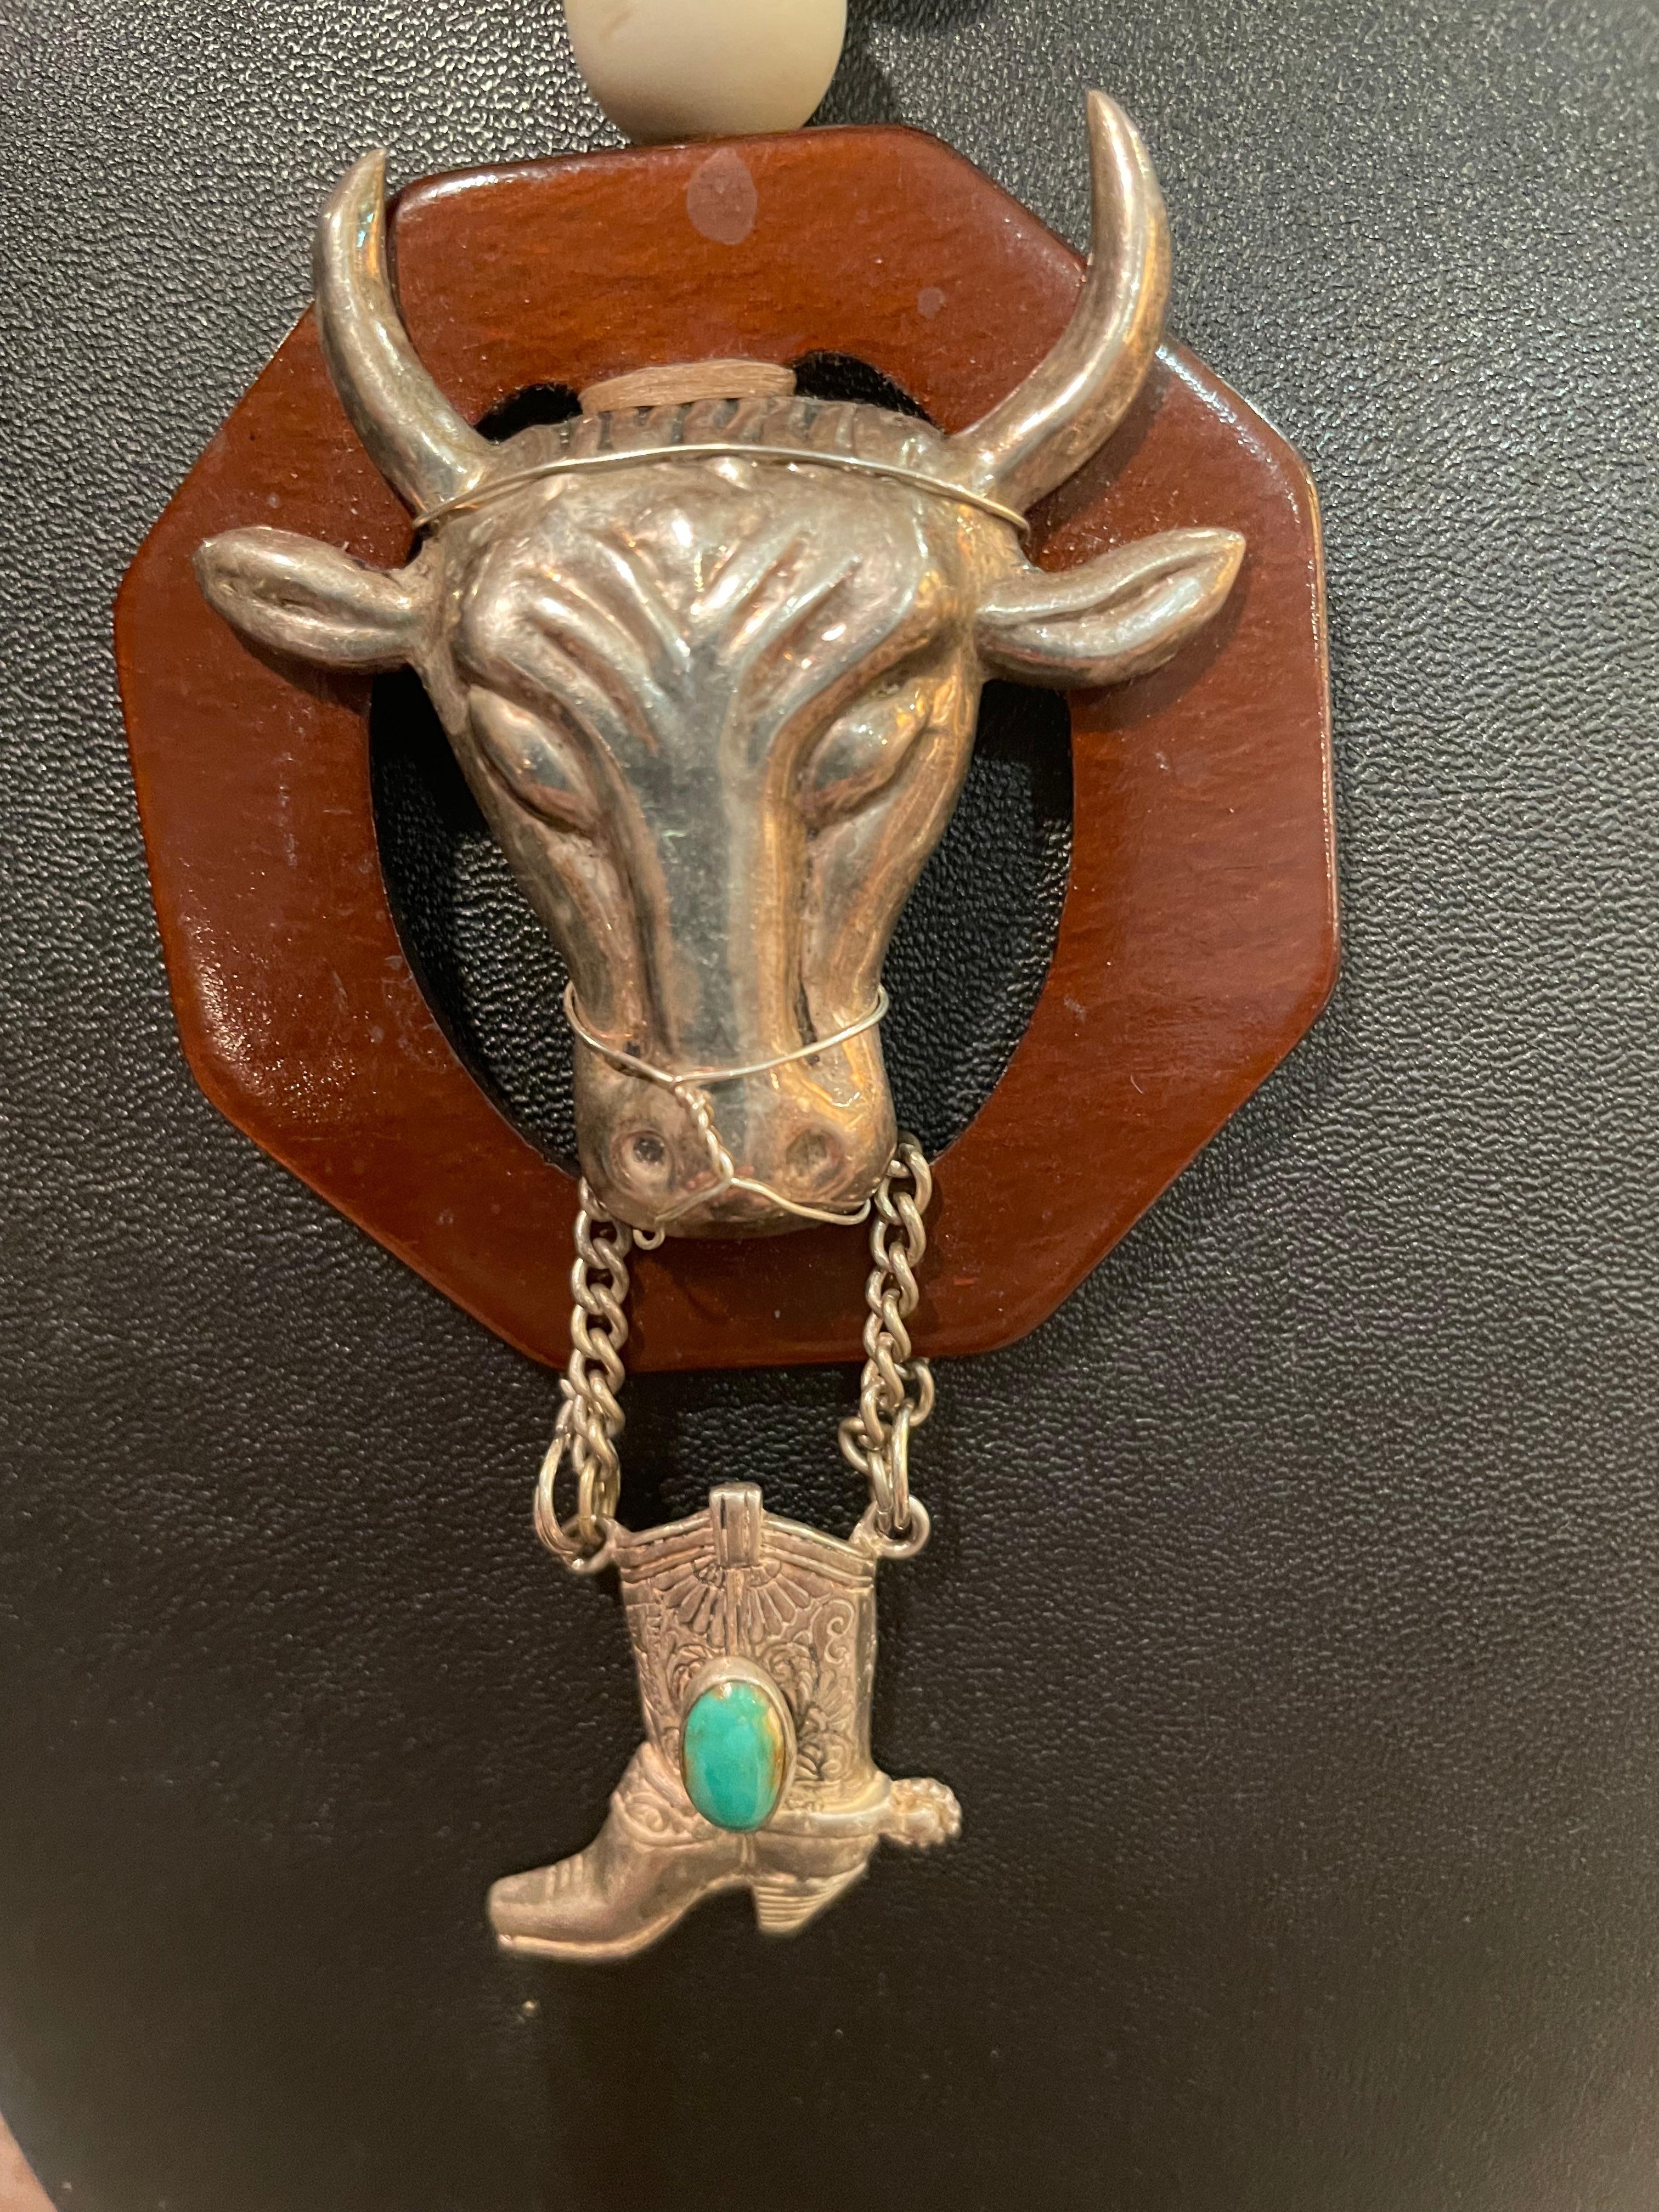 LB offers a stunning, handmade, one of a kind, Sterling Silver and Bakelite pendant necklace. The Sterling Silver Bull and cowboy boot are mid 20th Century brooches that have joined to create a gorgeous centerpiece for this unusual creation. Very